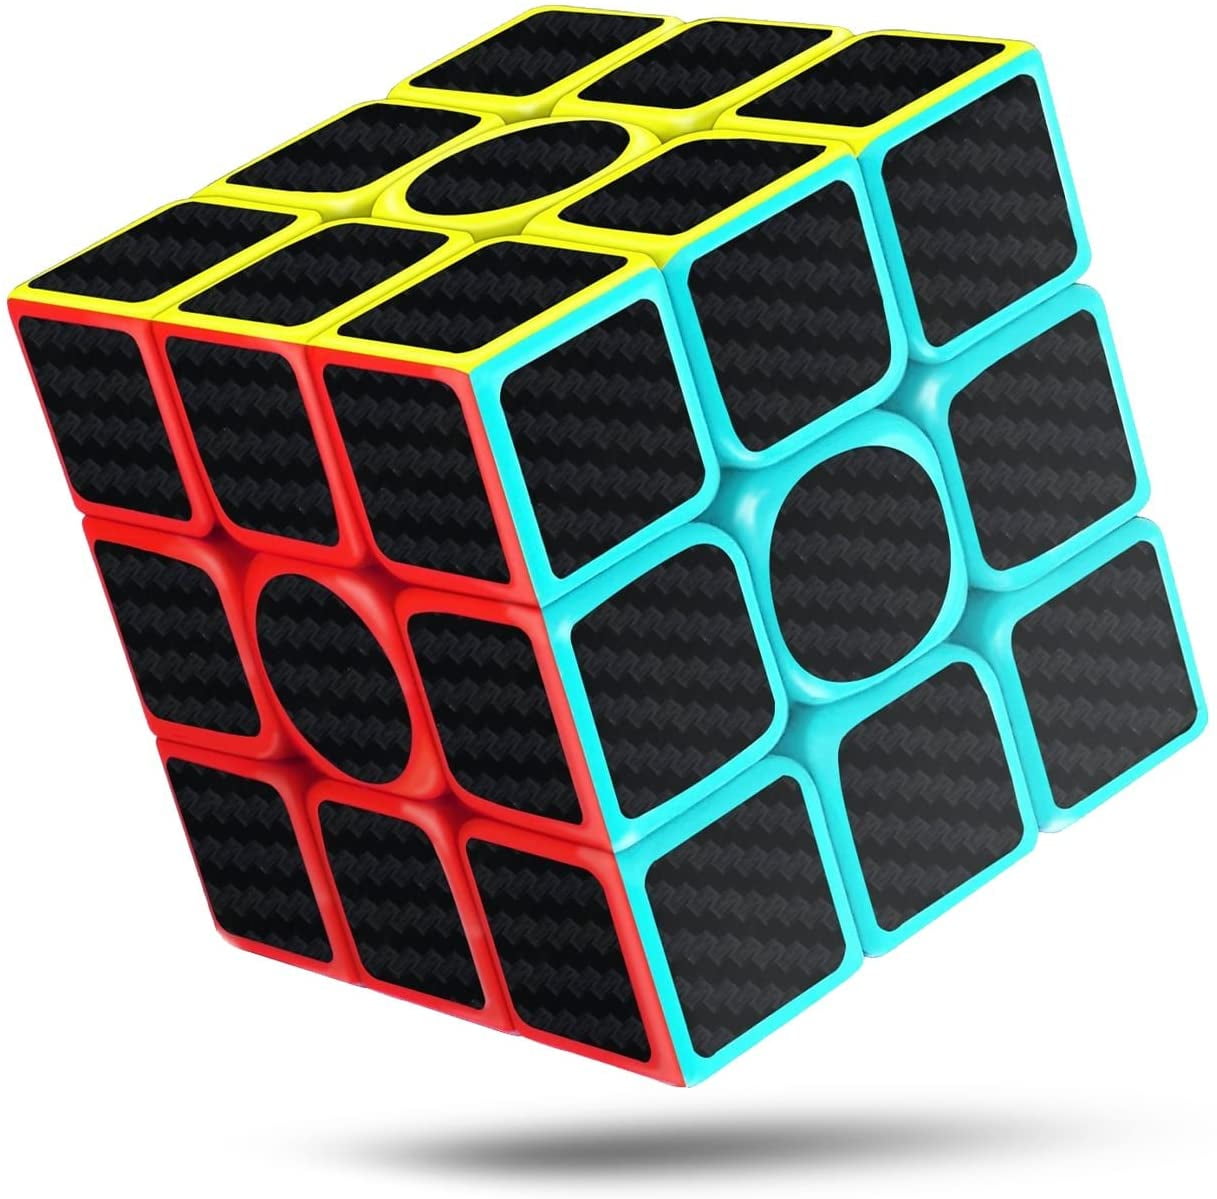 Zcube 2X2X2 Gear Twist Puzzle Speed Intelligence Magic Cube Toys Cloth stickers 